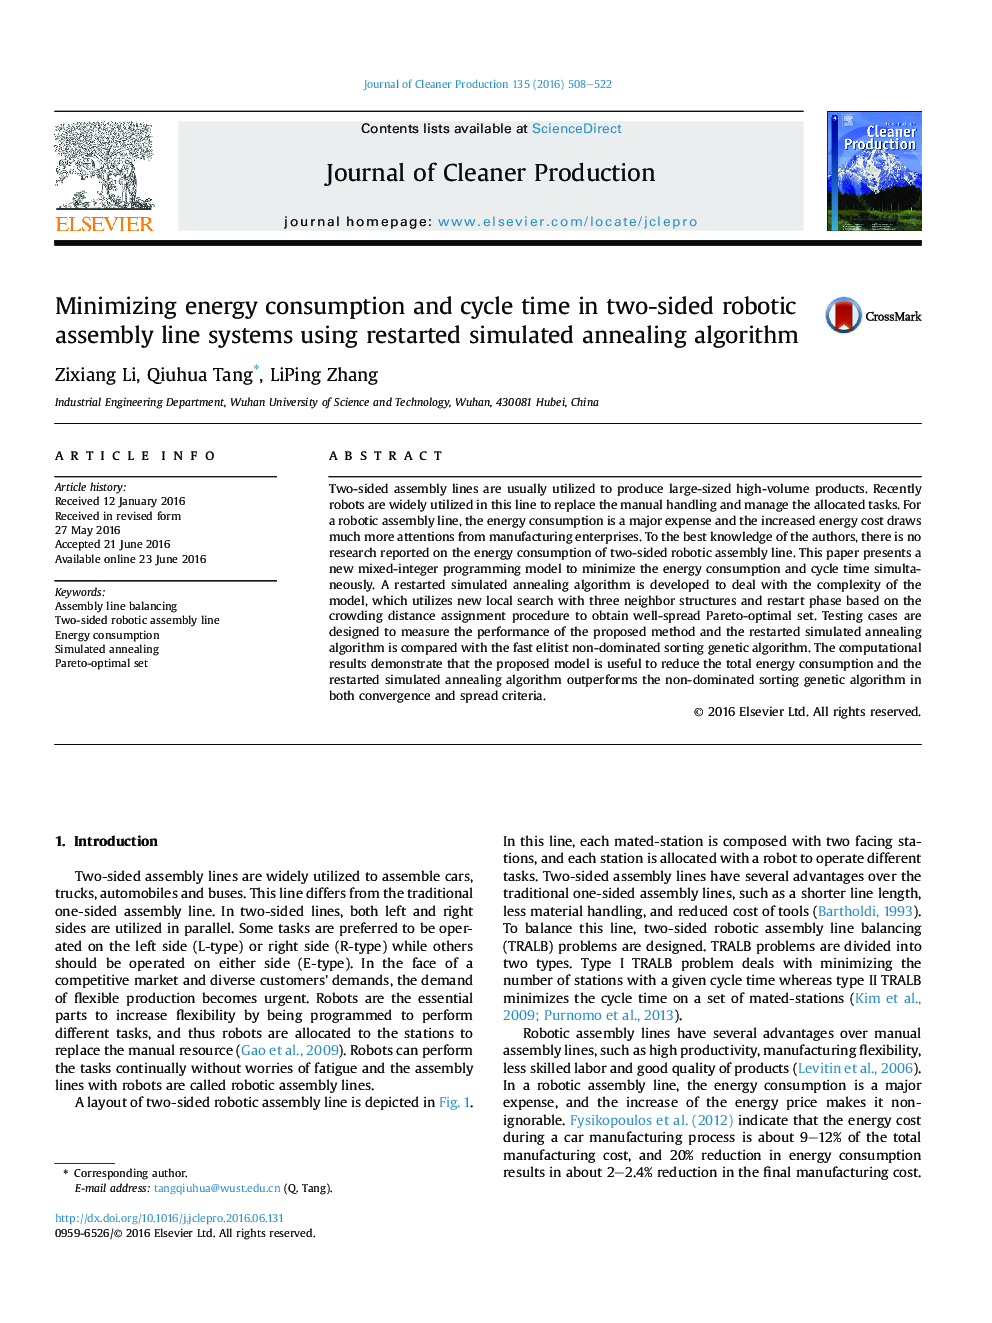 Minimizing energy consumption and cycle time in two-sided robotic assembly line systems using restarted simulated annealing algorithm